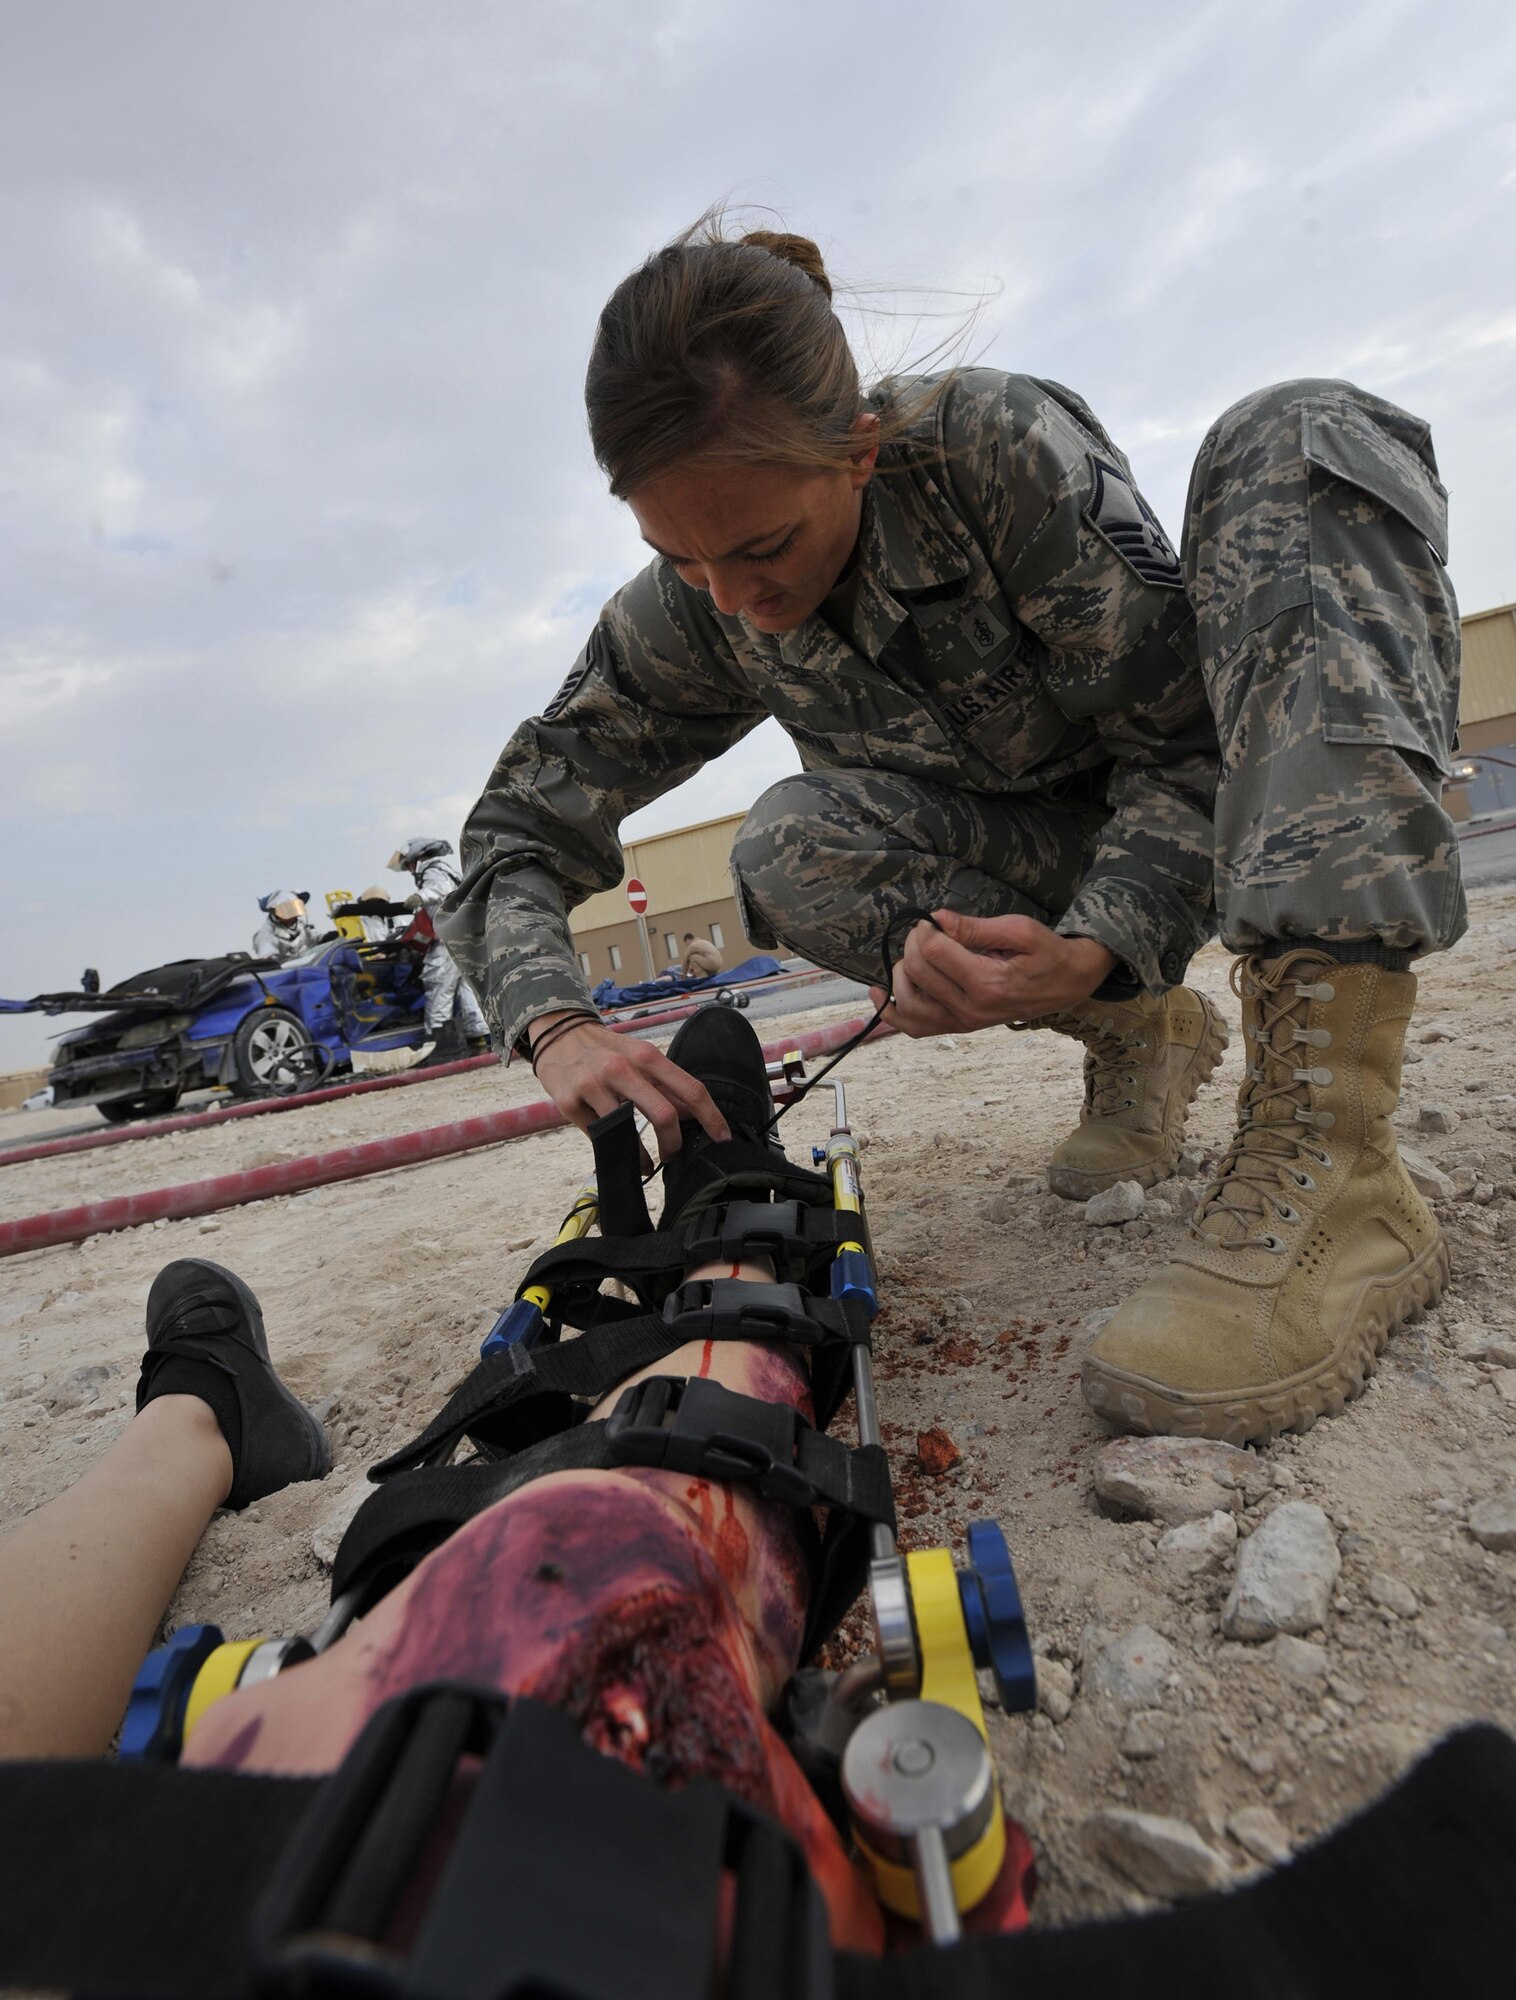 Master Sgt. Shanna Bufkin, medical technician, 340th Expeditionary Air Refueling Squadron, Al Udeid Air Base, Qatar, attends to a patient during a mass casualty exercise at Al Udeid Air Base, Qatar Dec. 15, 2015. The exercise tested the emergency response capabilities of fire and medical personnel. (U.S. Air Force photo by Master Sgt. Joshua Strang)